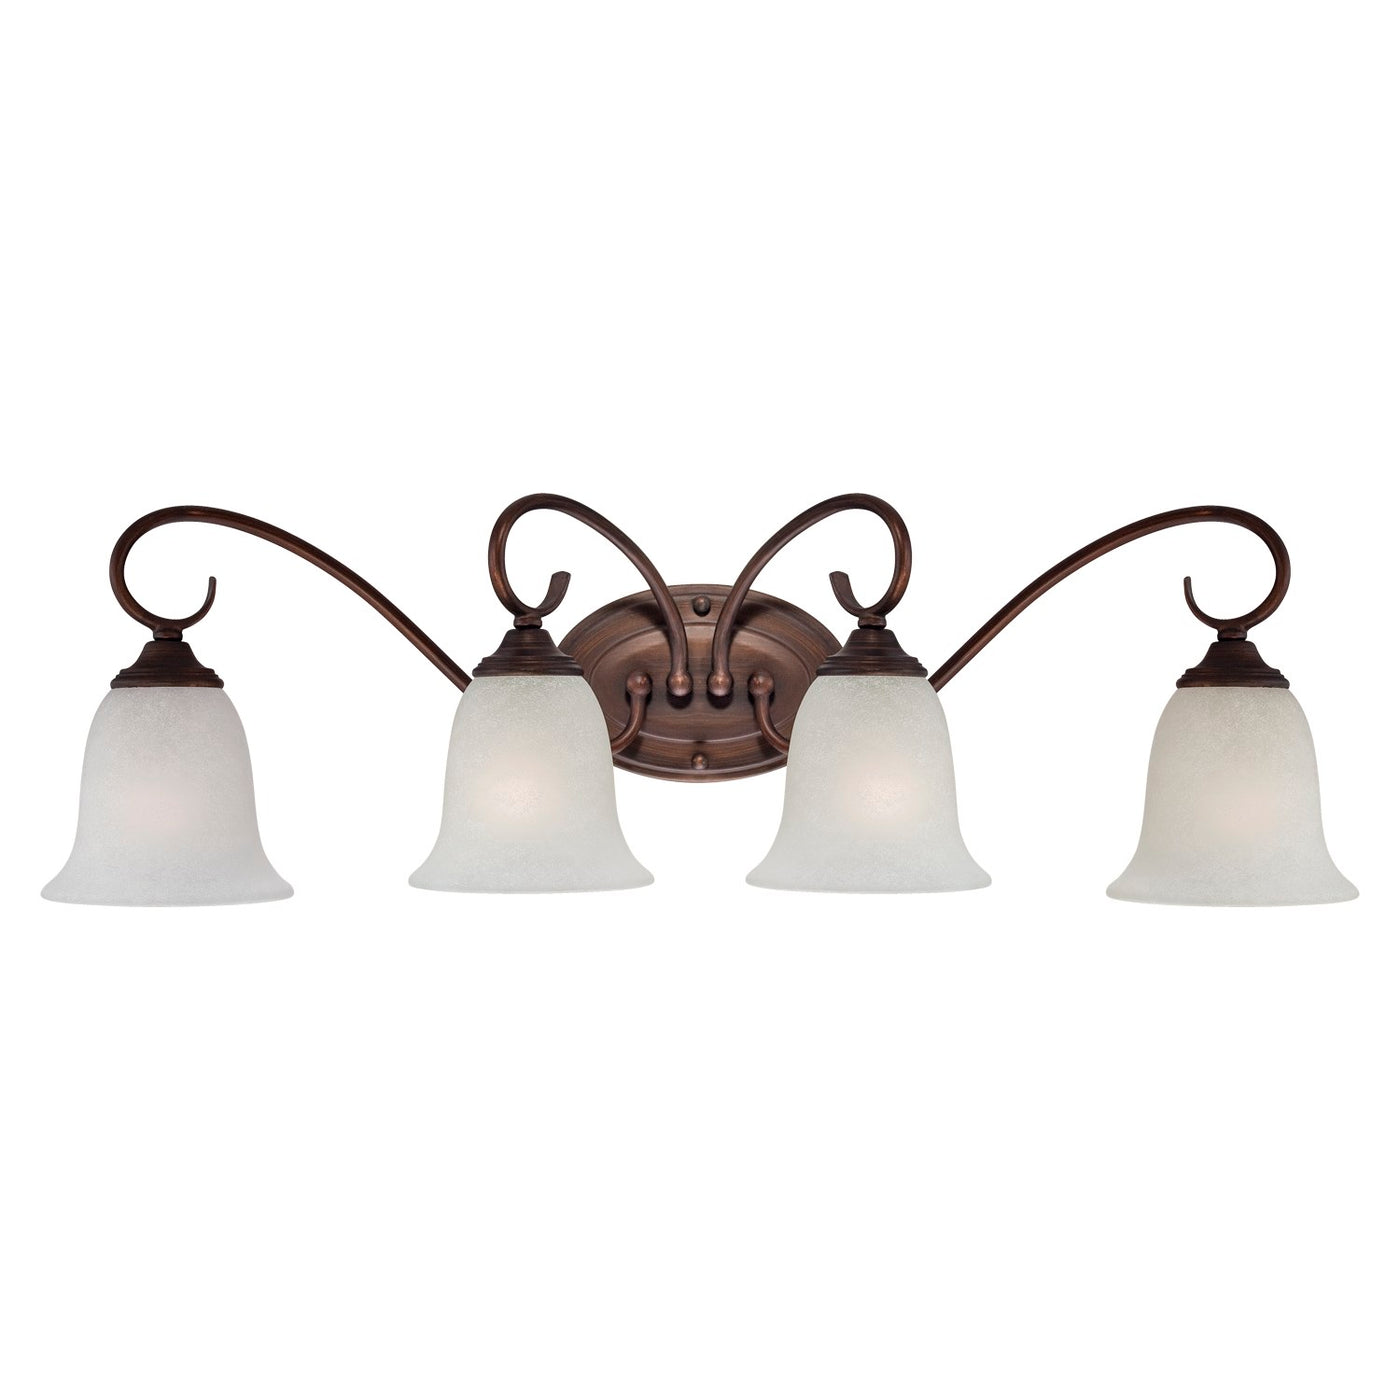 Millennium Lightings Vanity Offered in Rubbed Bronze finish, Item Number 1184-RBZ